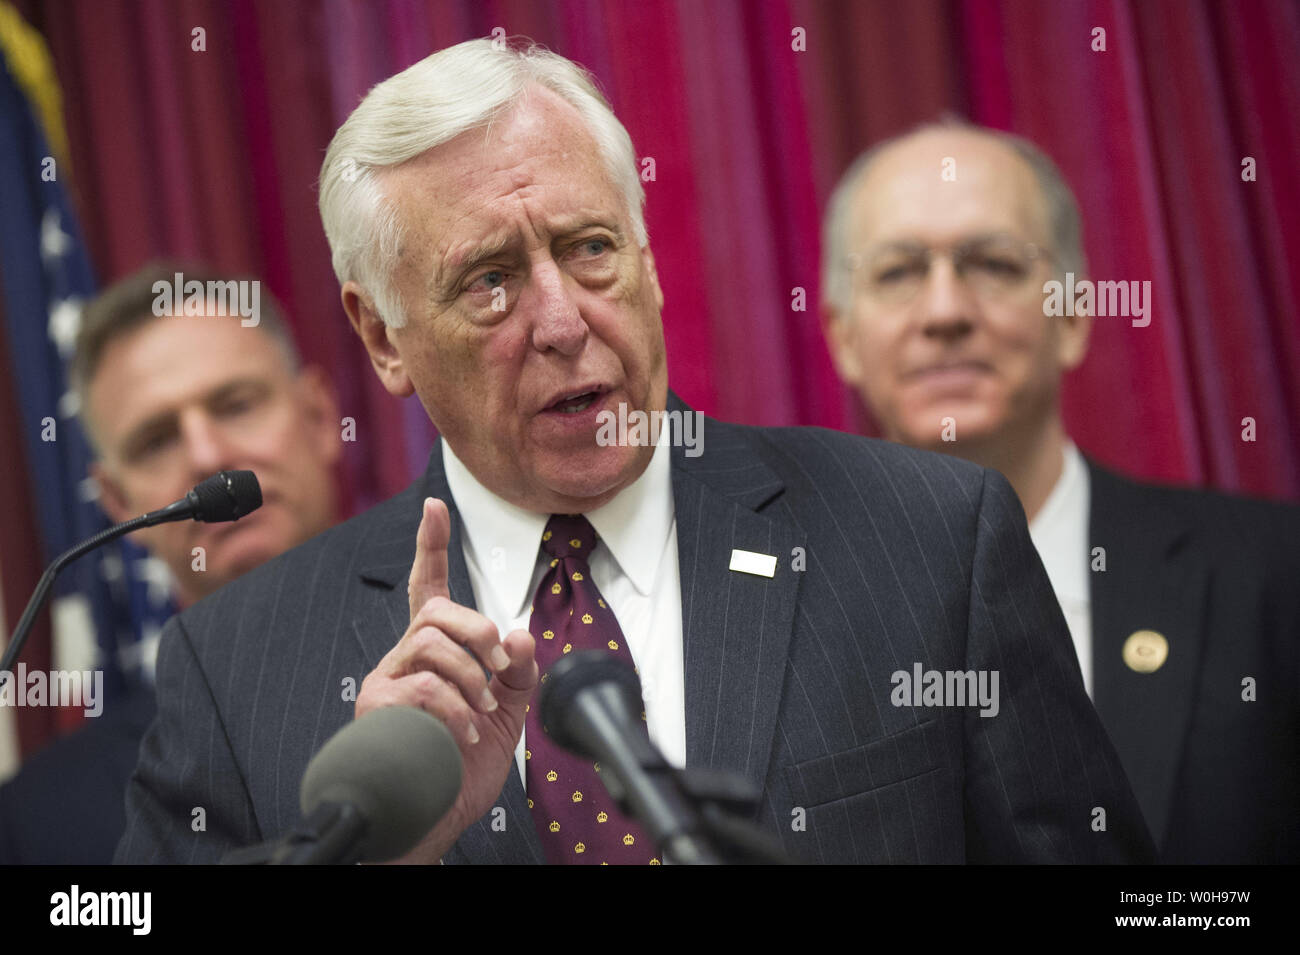 House Minority Whip Steny Hoyer (D-MD) speaks at a press conference on immigration reform on Capitol Hill in Washington, D.C., November 13, 2013. UPI/Kevin Dietsch Stock Photo